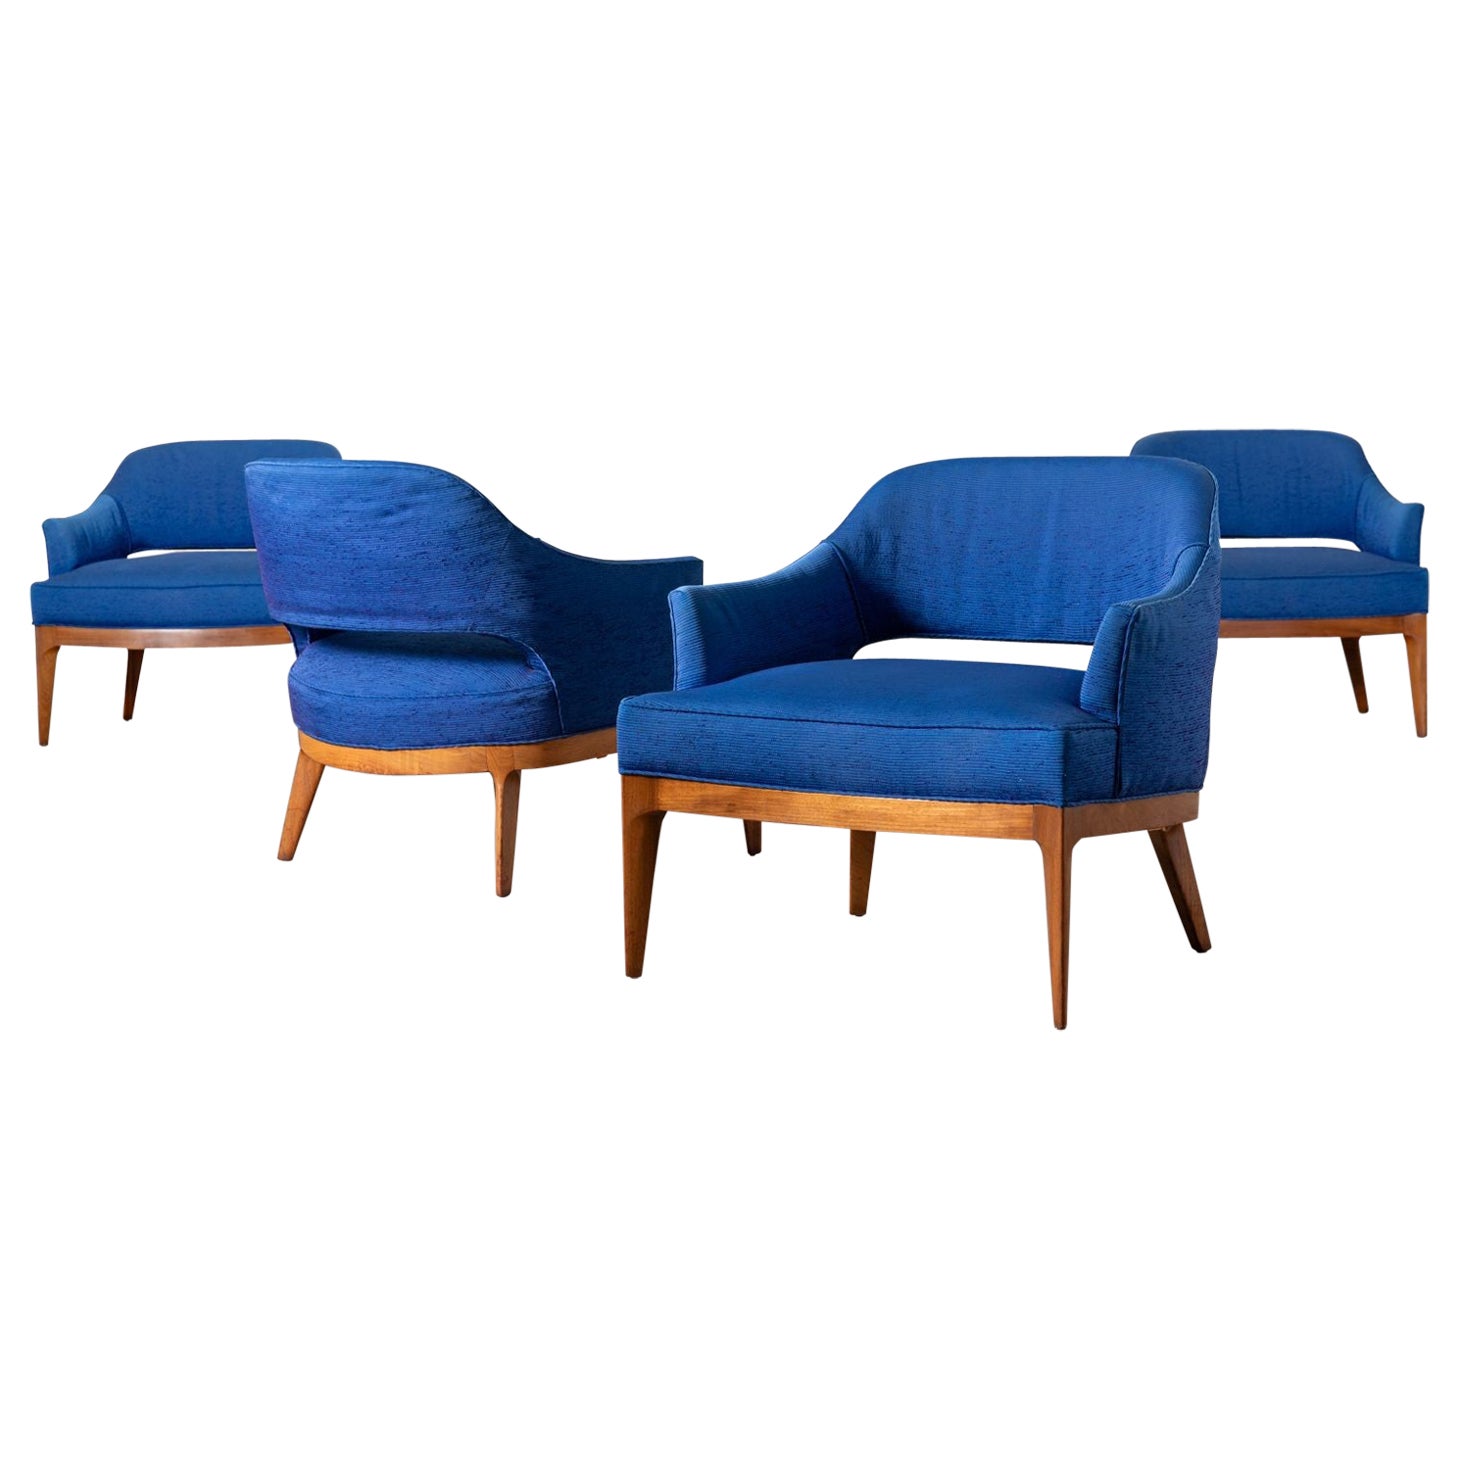 Erwin Lambeth Open Back Lounge Chairs in Raw Blue Silk with Walnut Frames 1960s For Sale